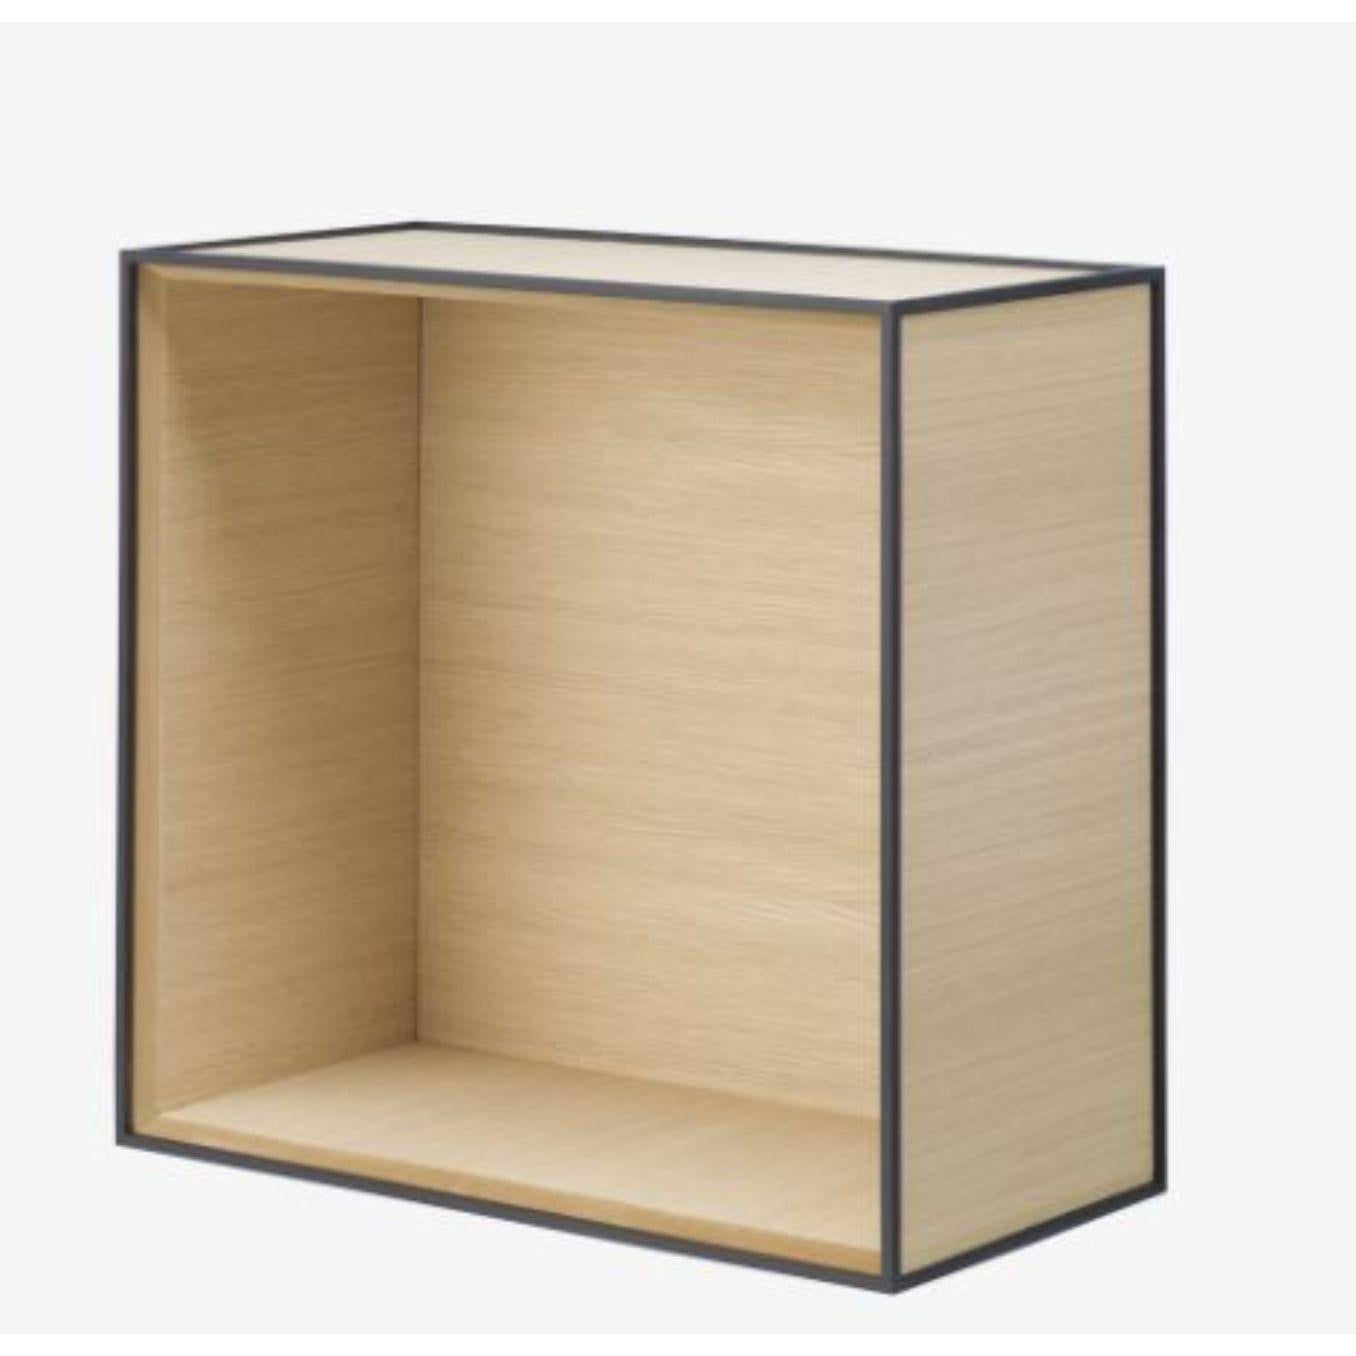 42 Oak frame box by Lassen
Dimensions: D 42 x W 21 x H 42 cm 
Materials: Finér, Melamin, Melamin, Melamine, metal, veneer, oak
Also available in different colours and dimensions.
Weight: 10.5 Kg


By Lassen is a Danish design brand focused on